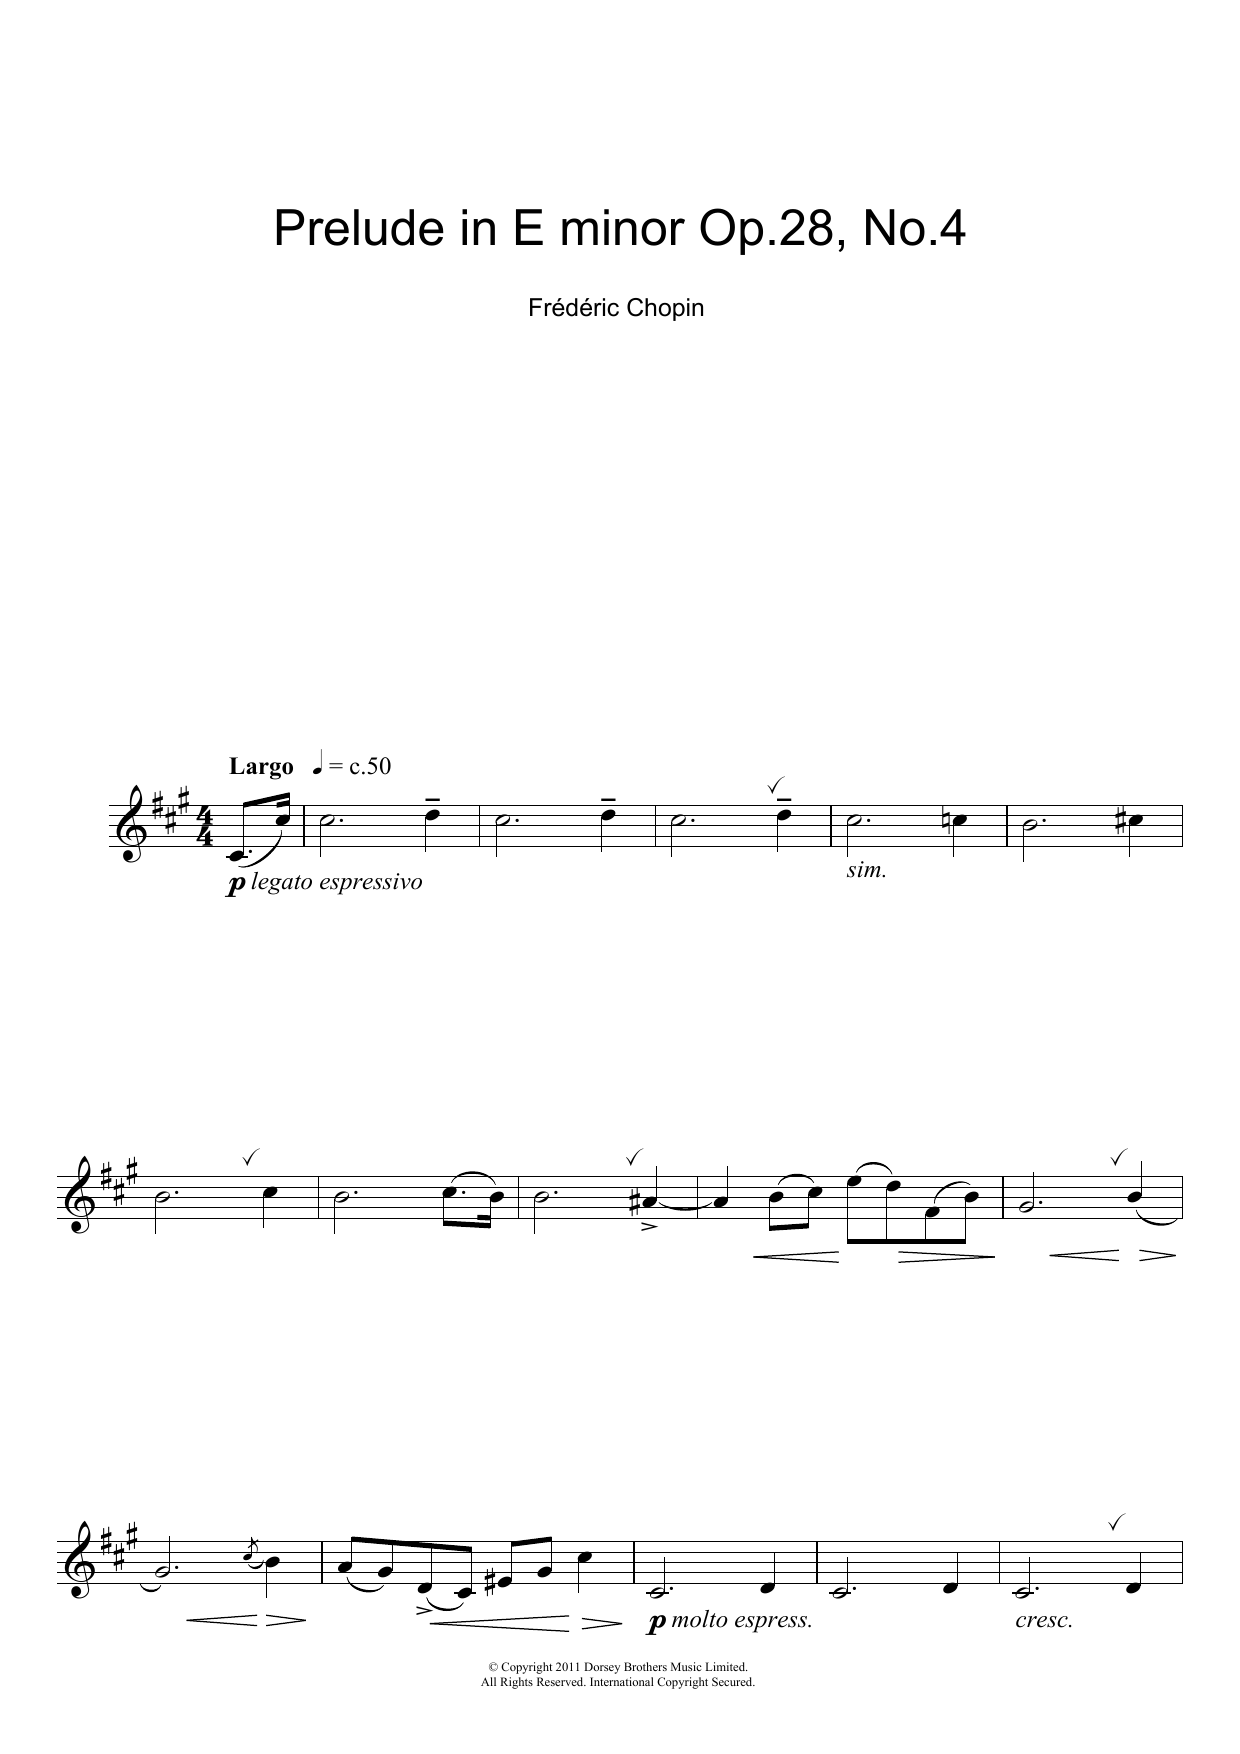 Download Frederic Chopin Prelude in E Minor, Op.28, No.4 Sheet Music